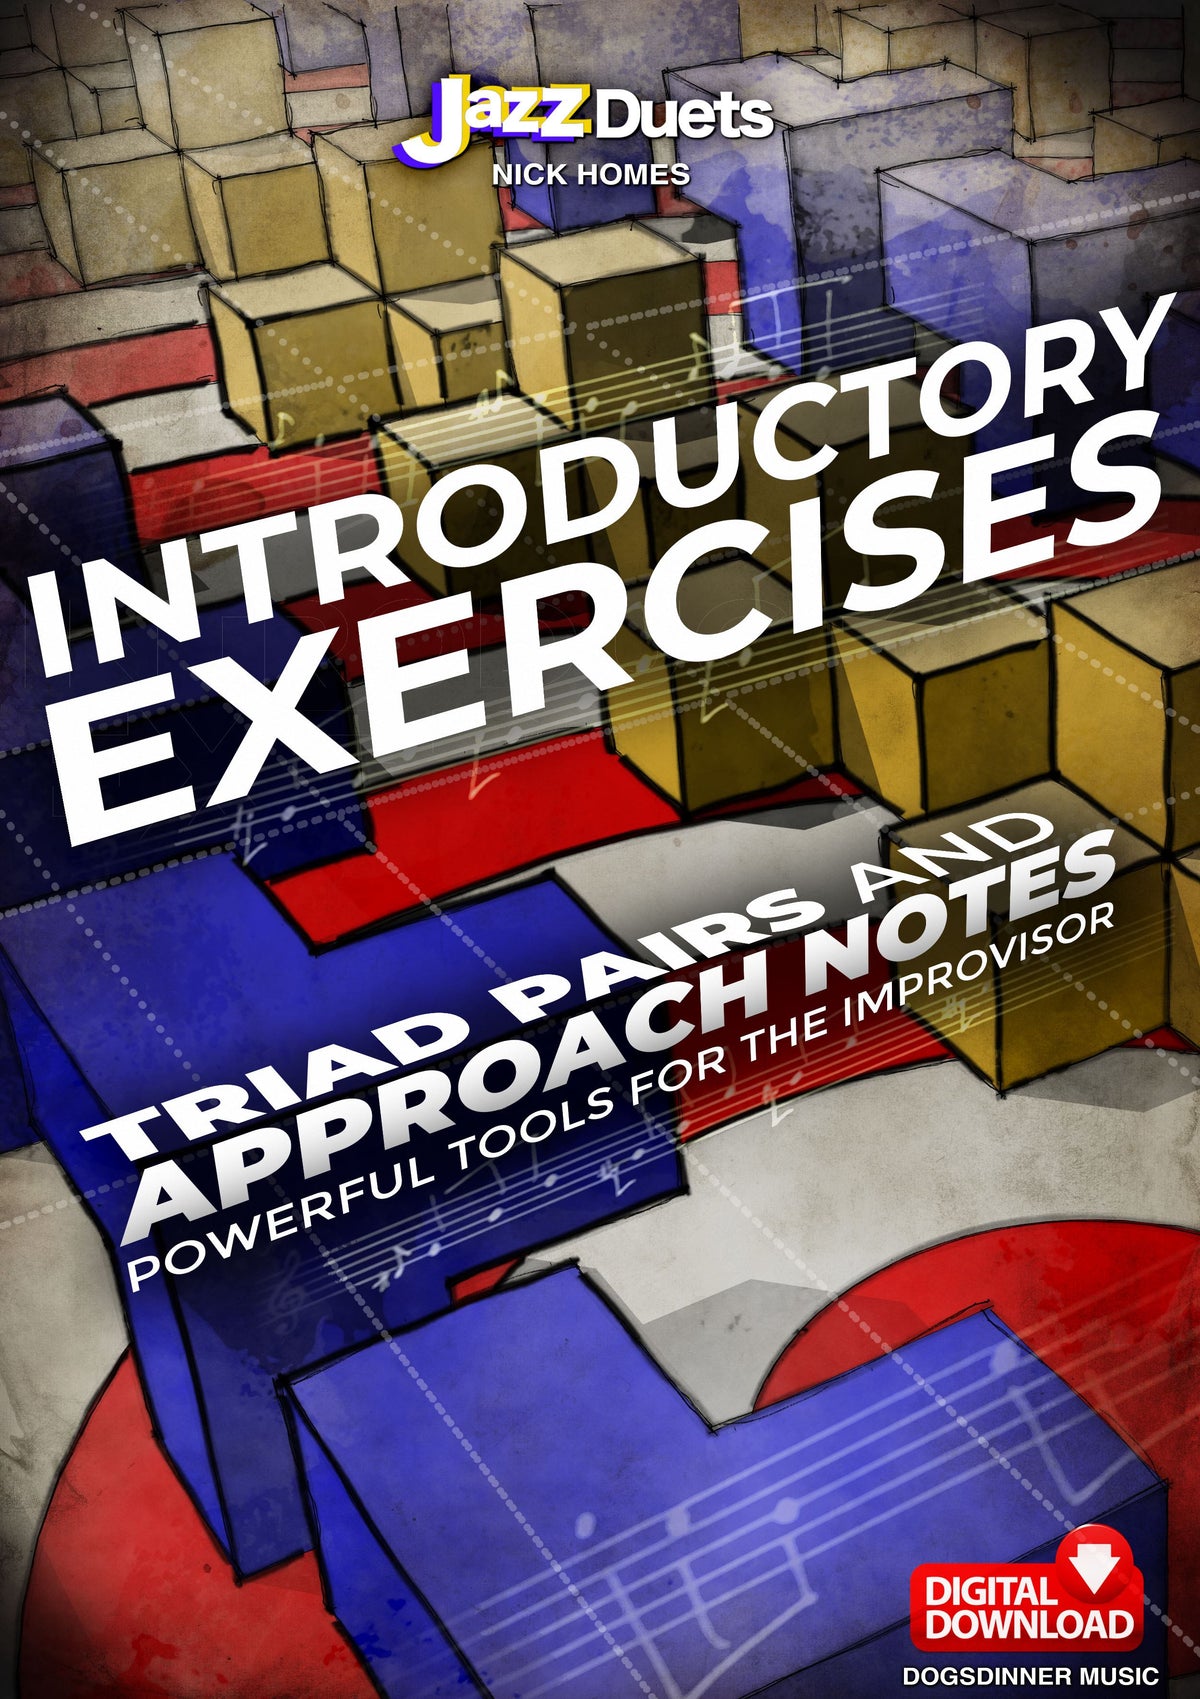 Introductory Triad Pair Approach note exercises- all instruments